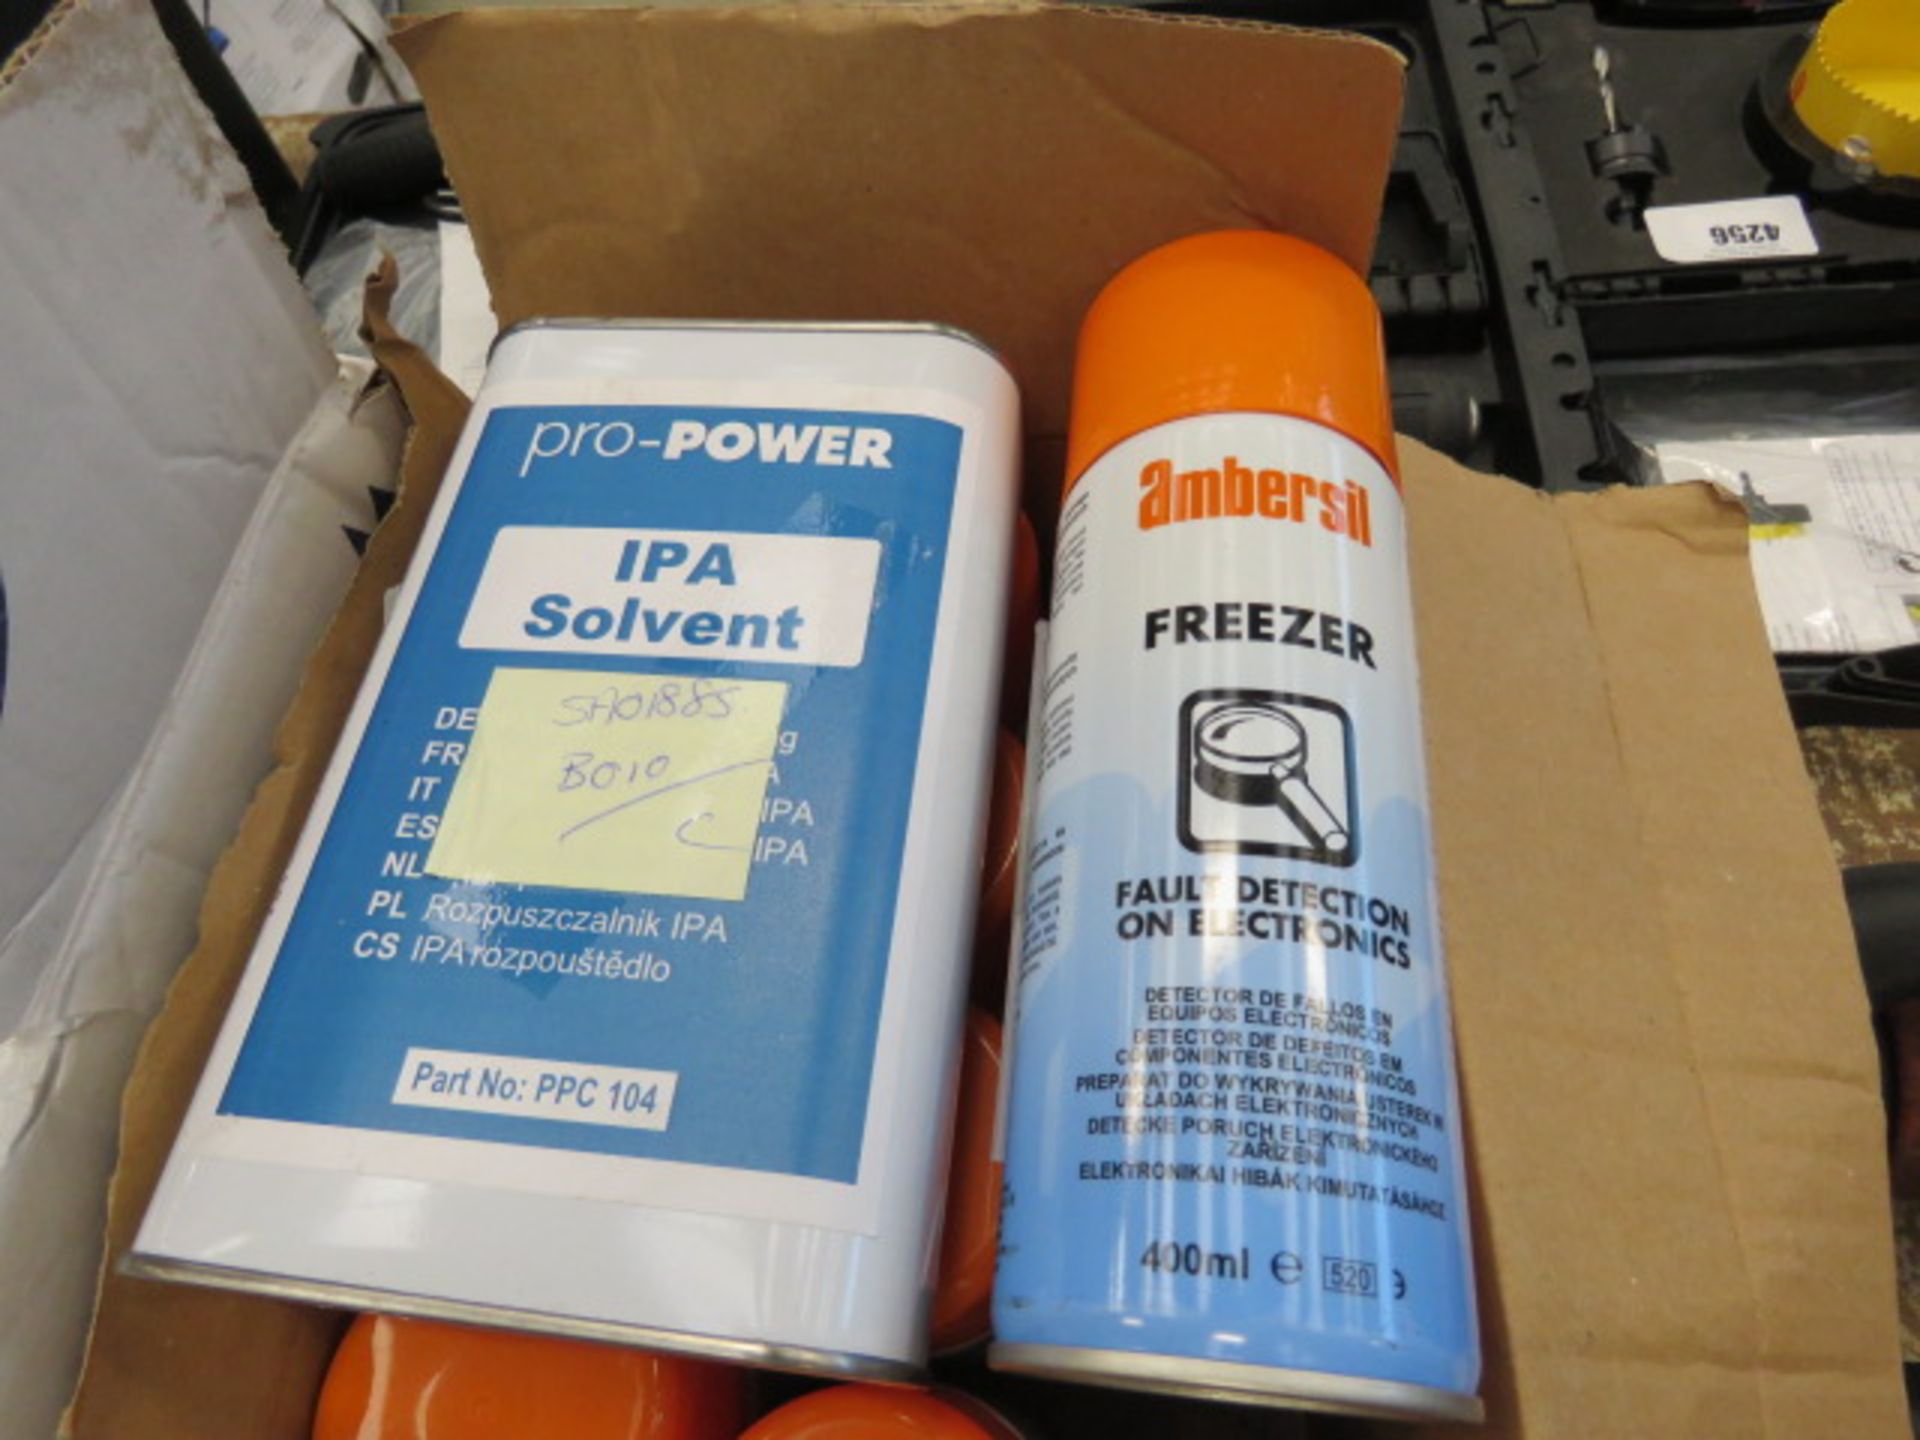 Box of renovator spray, solvent and box of fault detection spray - Image 3 of 3